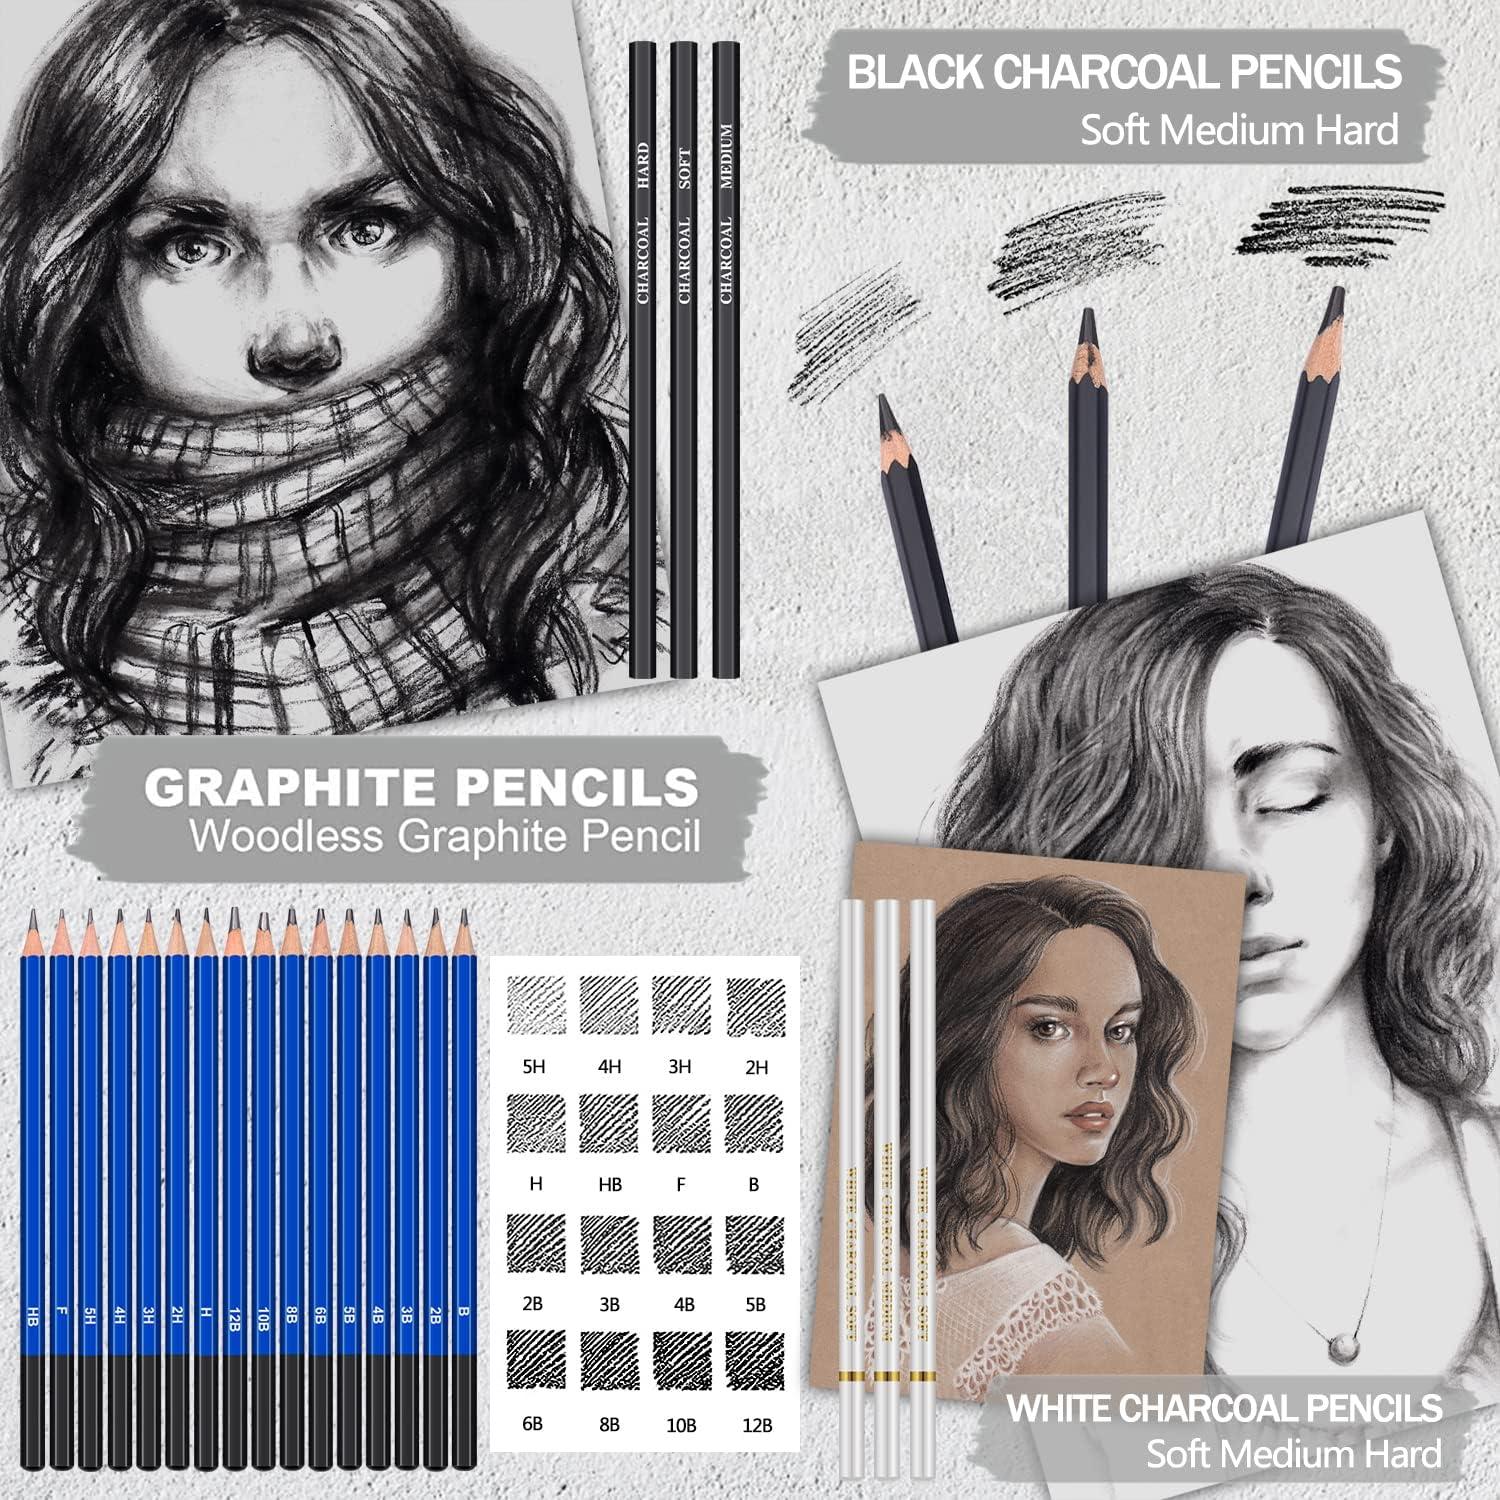 PANDAFLY 80 Pack Drawing Set Sketching Kit, Pro Art Supplies with 3-Color  Sketchbook, Watercolor Pad, Colored, Graphite, Charcoal, Metallic Pencil